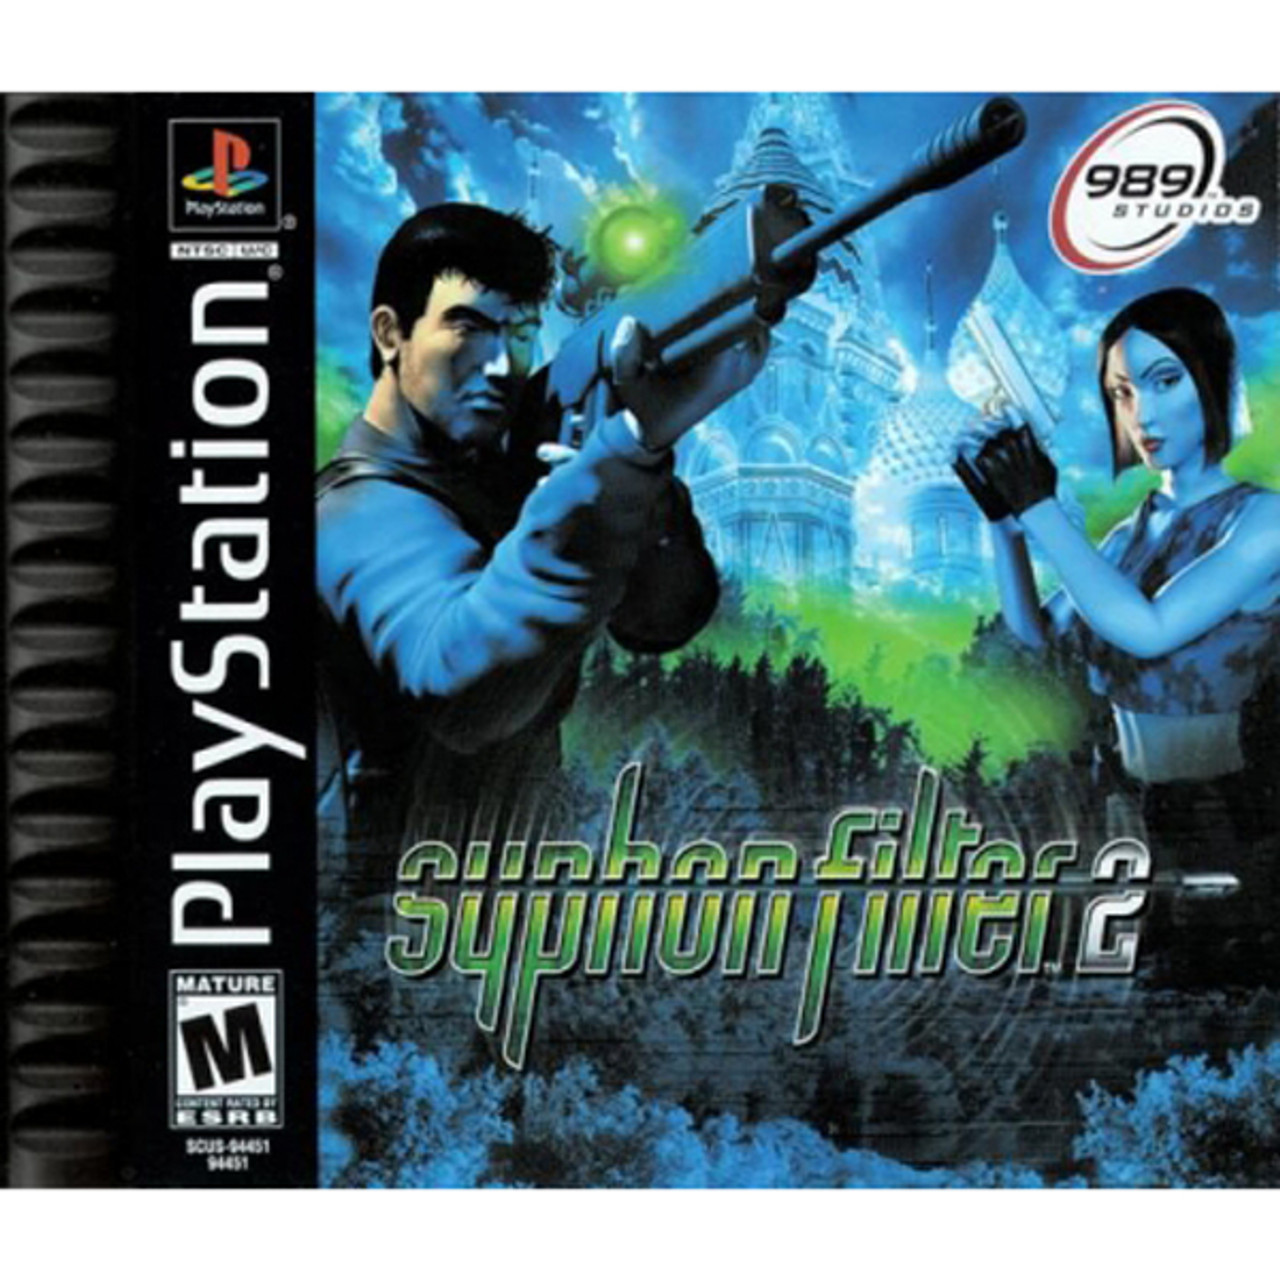 Syphon Filter Playstation PS1 Disc Only